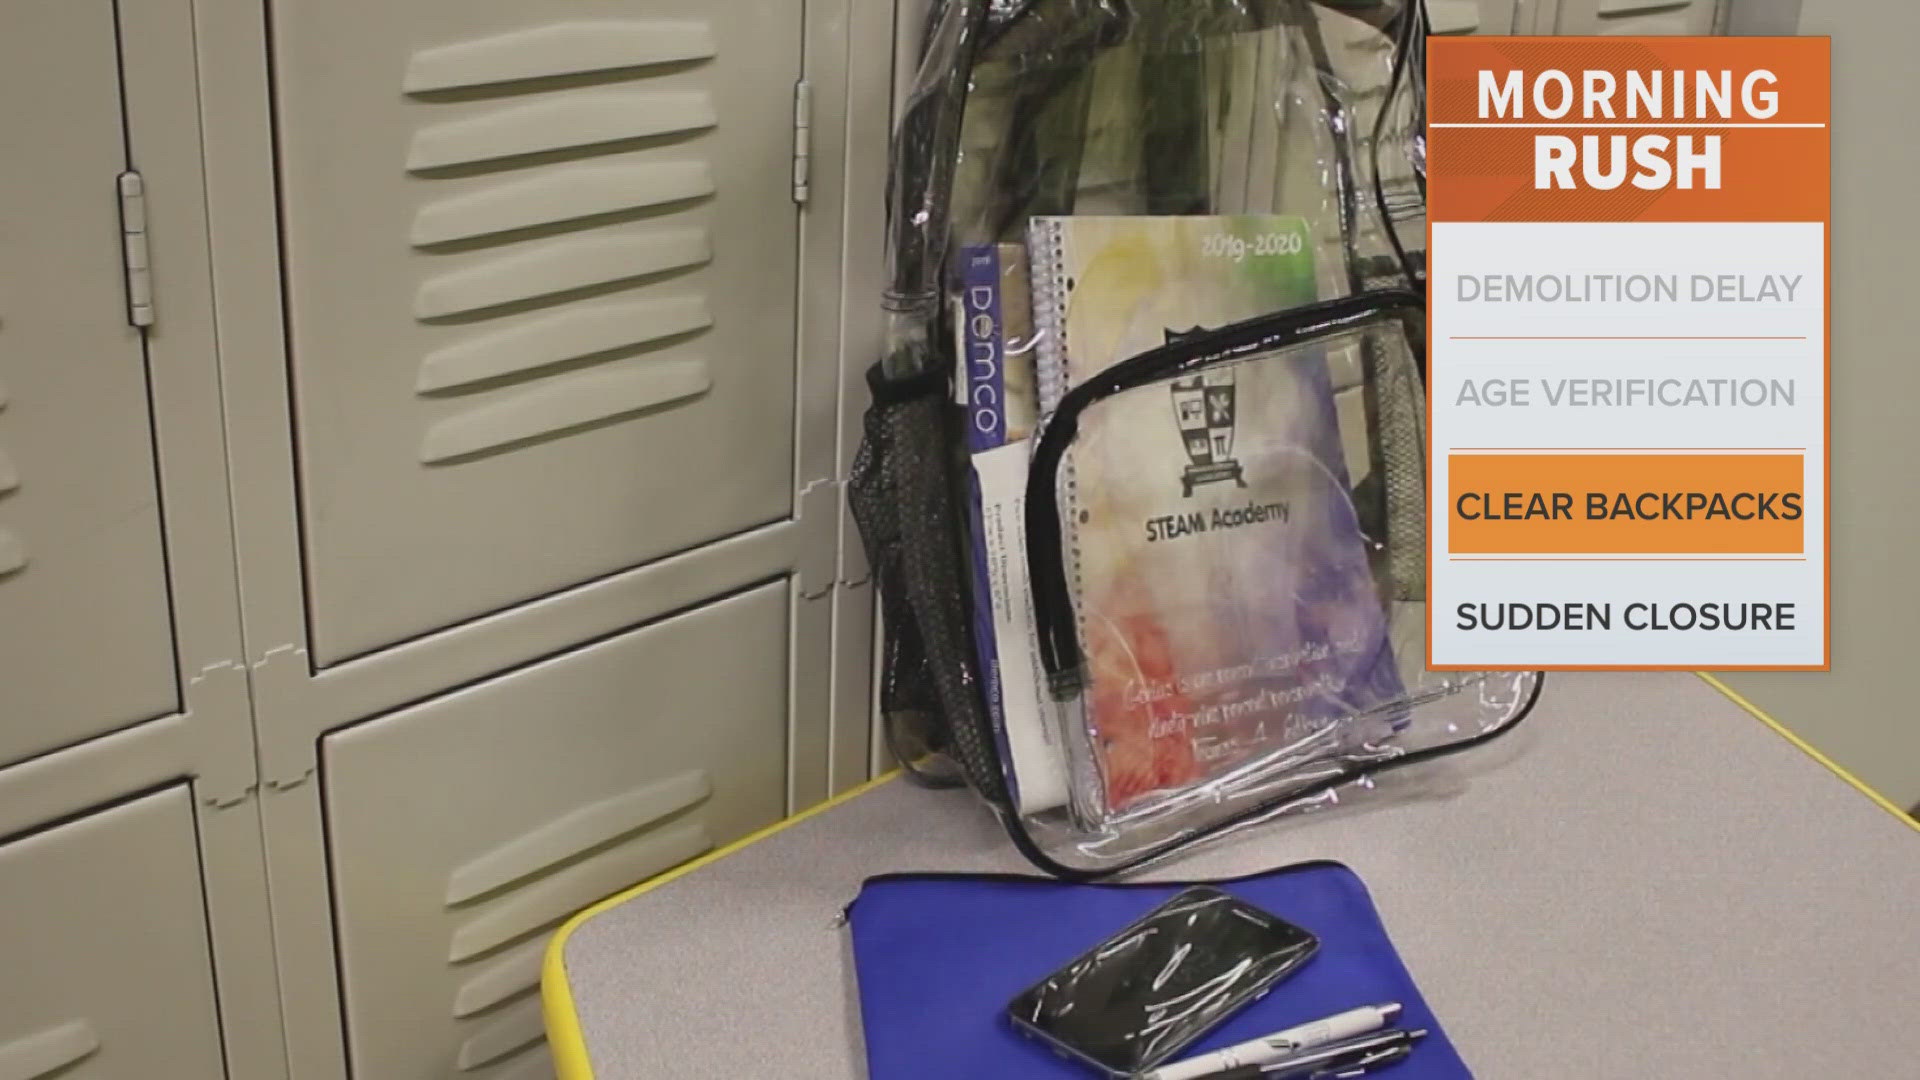 The district will provide students with backpacks if they don't already have one.